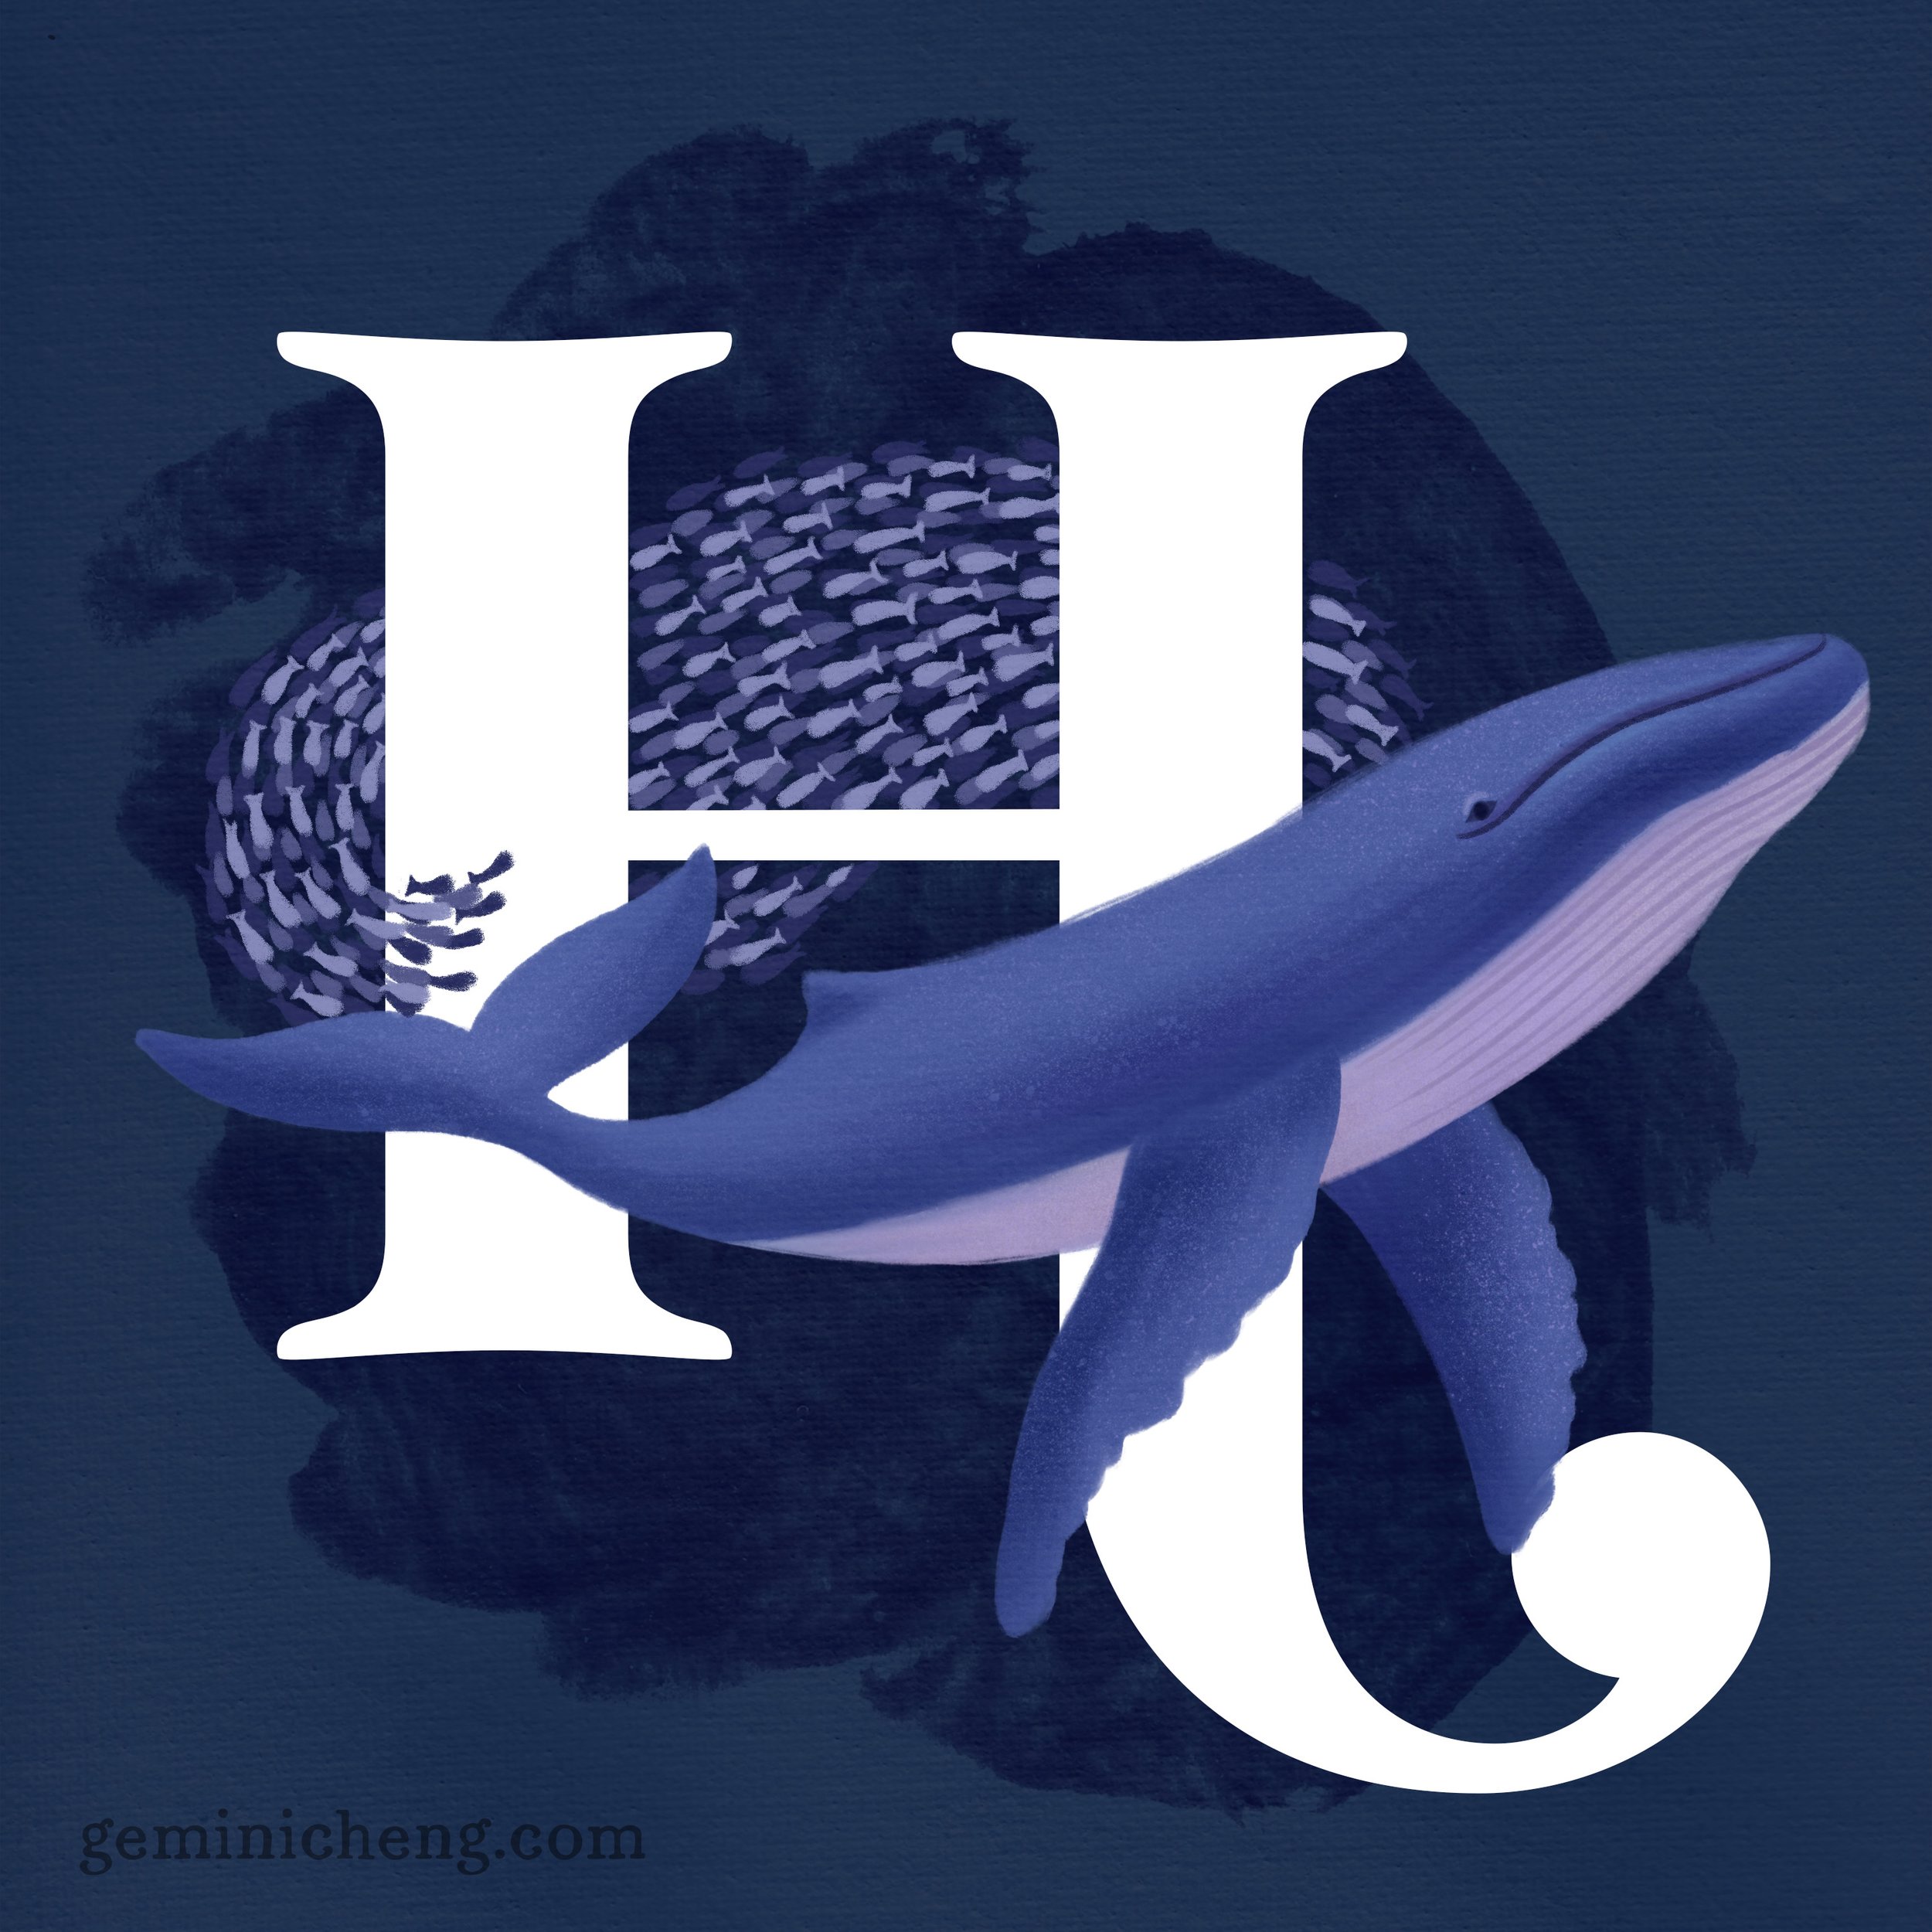 H for Humpback Whale_1080p.jpg